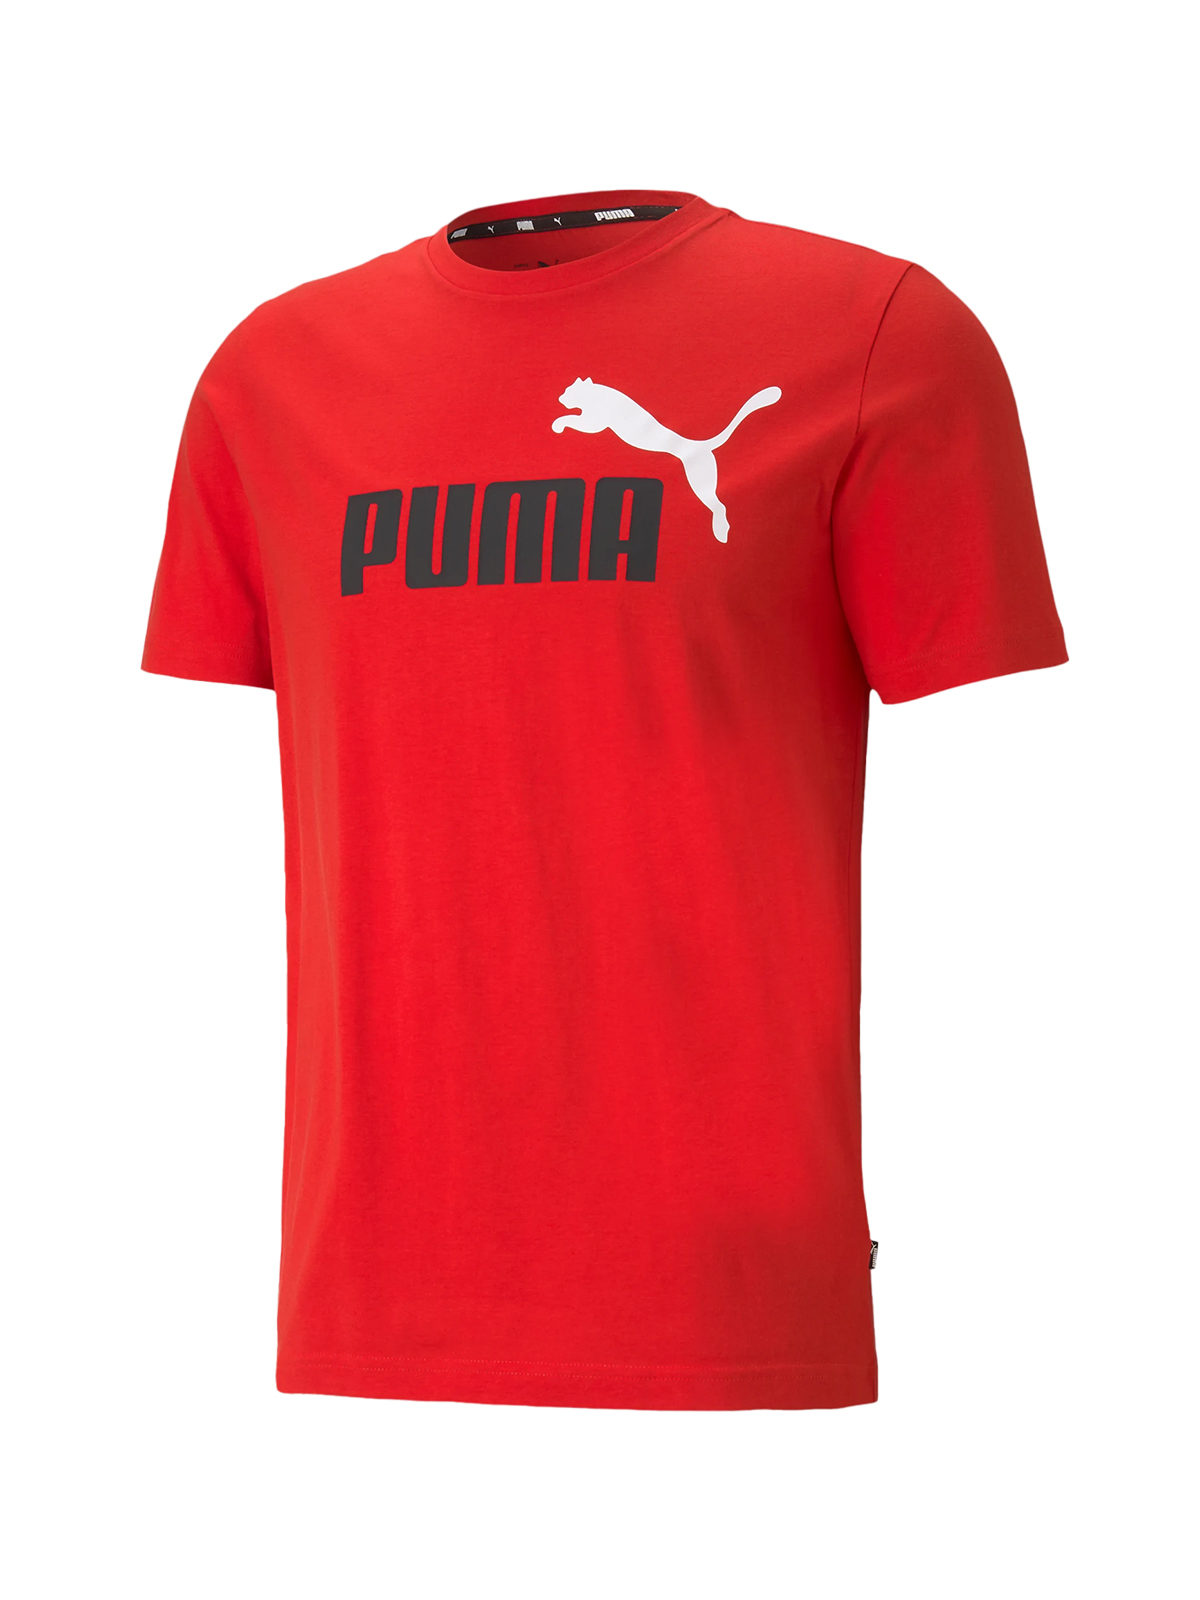 sale 2 on T-shirt: Men\'s TEE for at 20.69€ ESS sleeve Puma LOGO short + COL